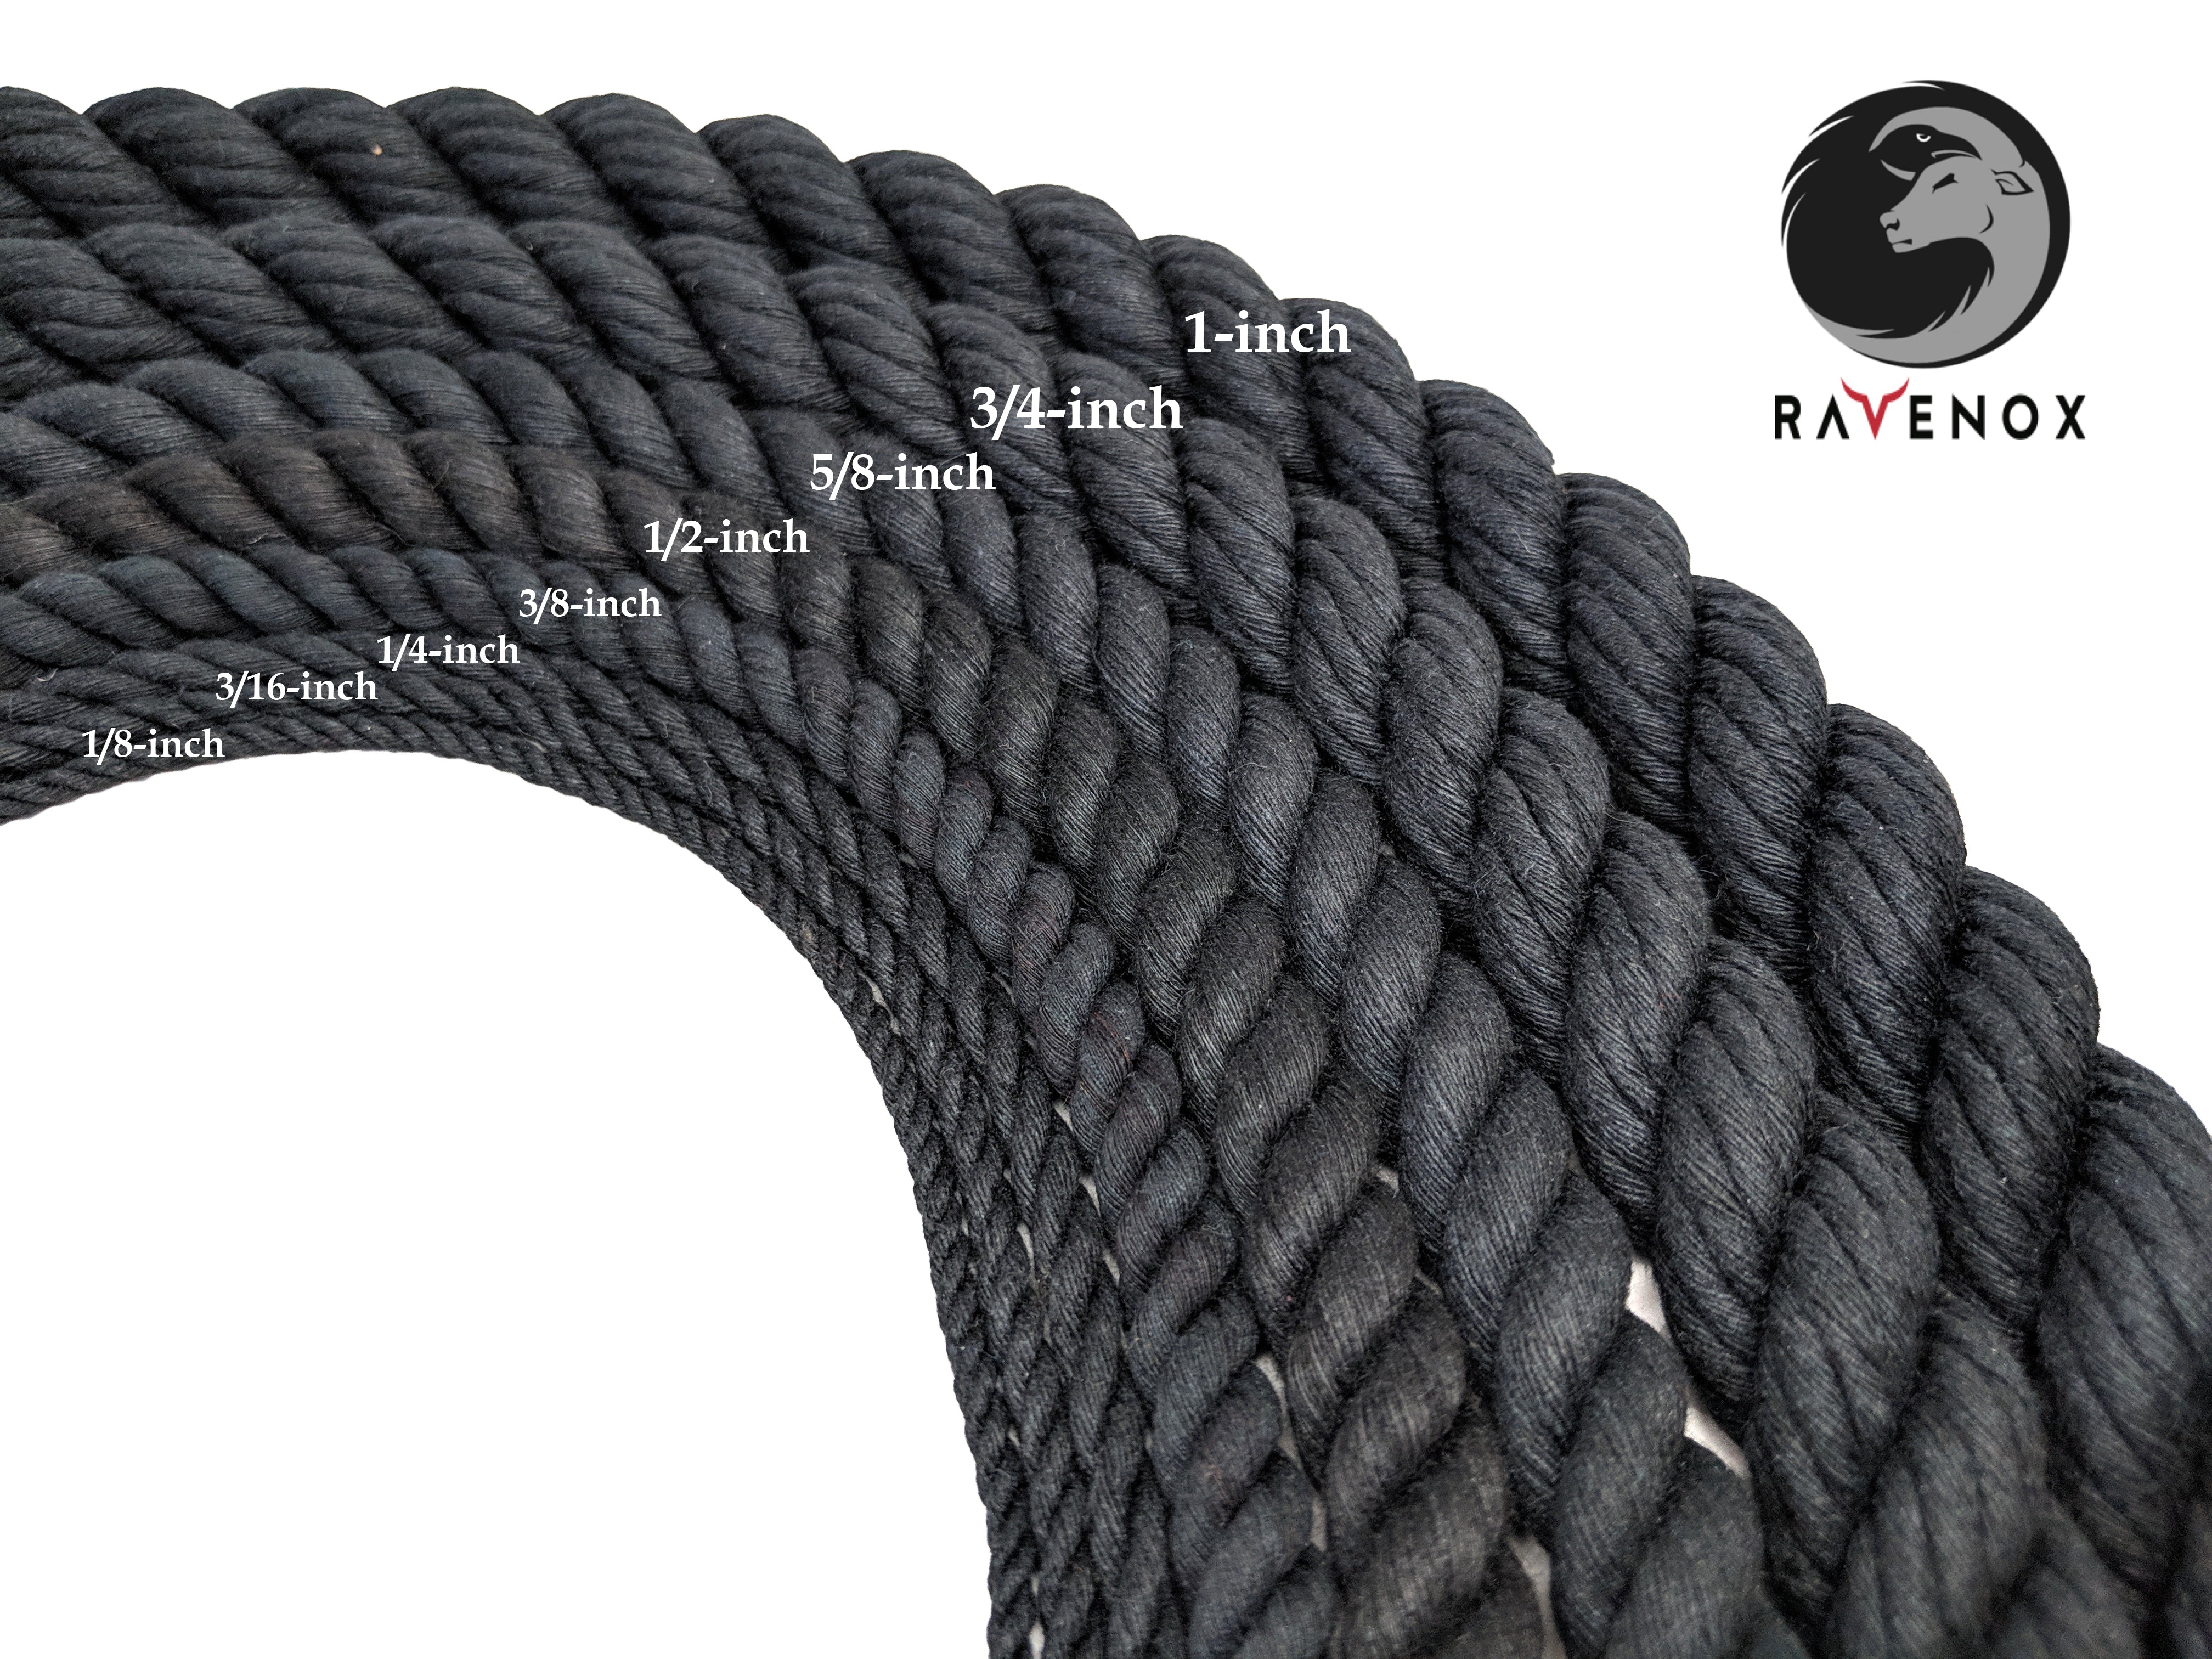 Macramé & Indoor Outdoor Use| by The Foot & Diameter Crafts Strong Triple-Strand Cordage for Sports Multiple Colors Made in The USA Ravenox Natural Twisted Cotton Rope Décor Pet Toys 